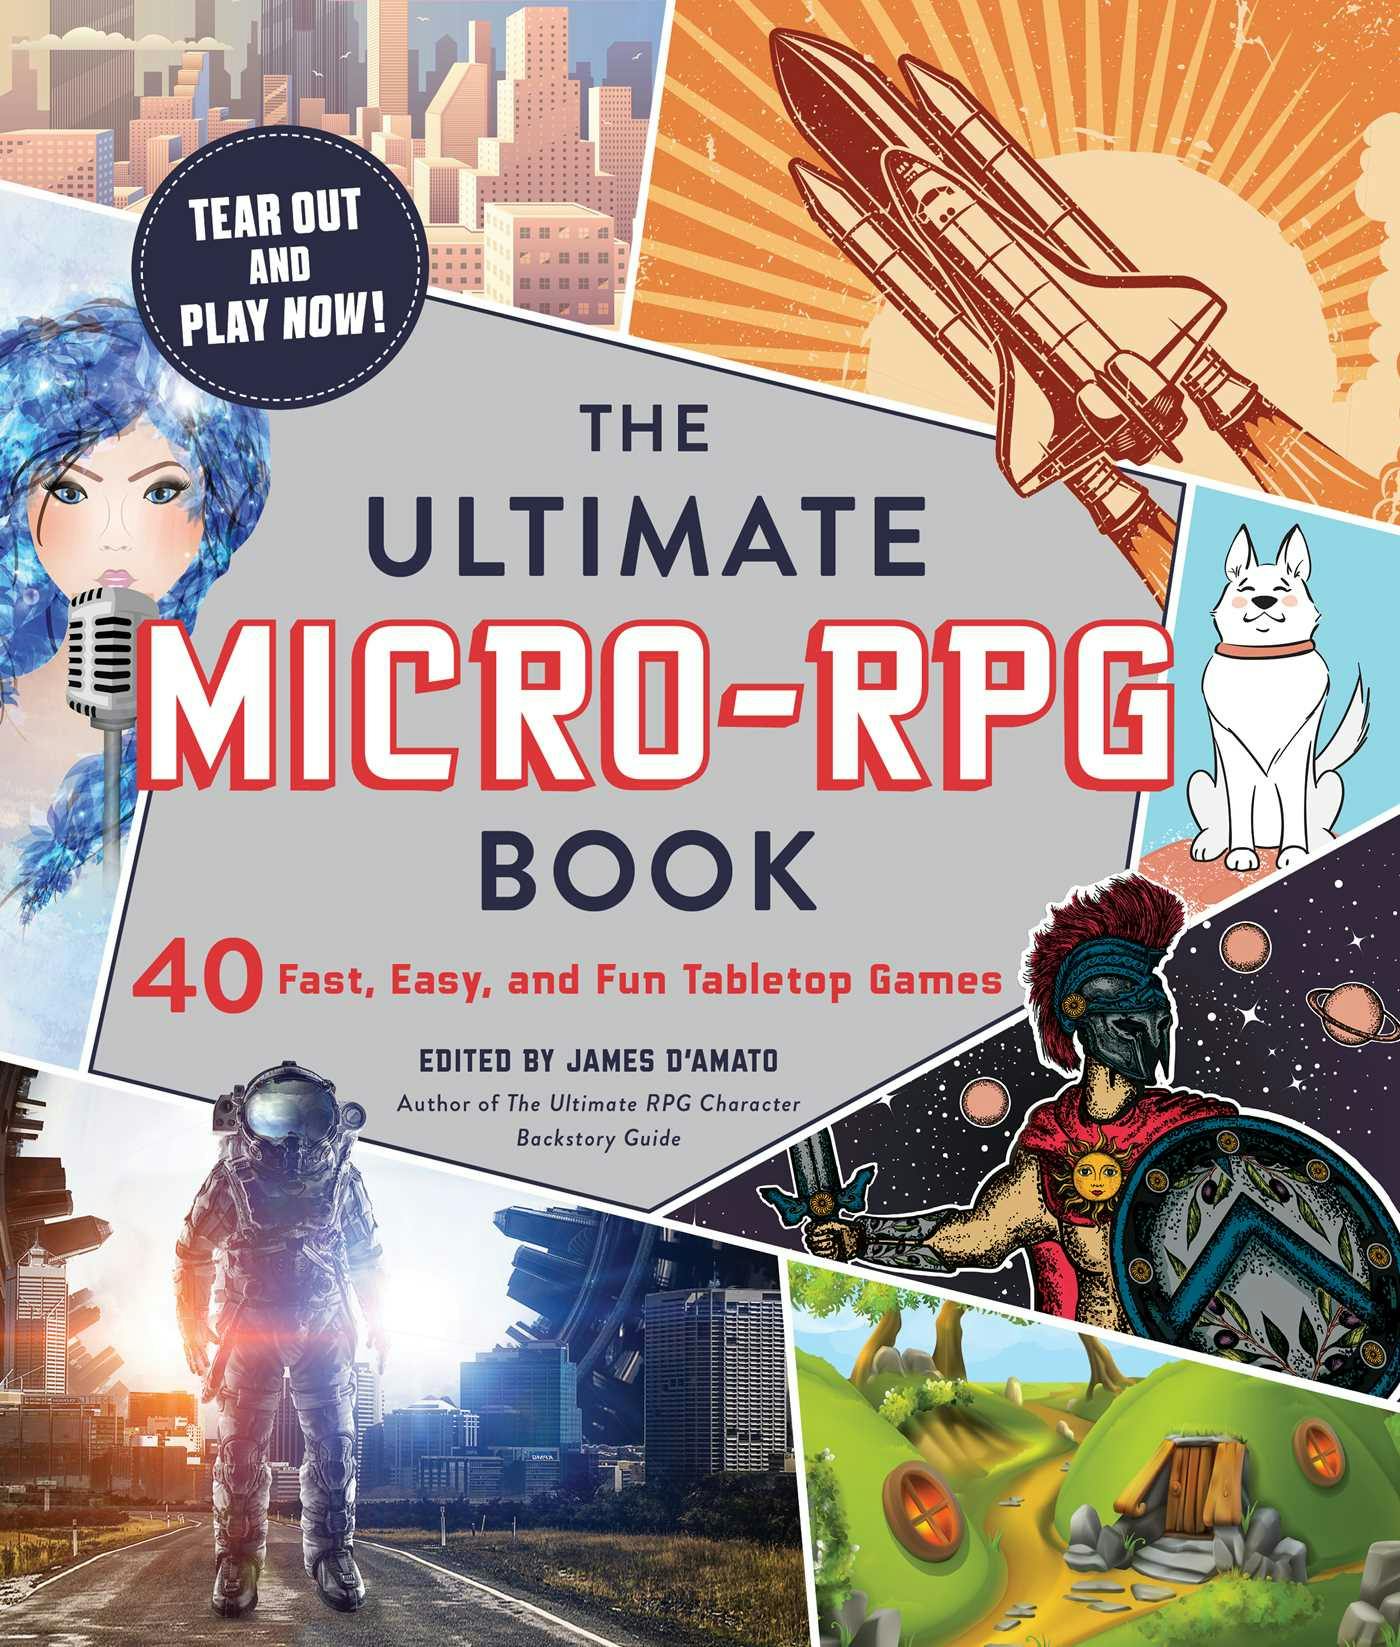 The Ultimate Micro-RPG Book: 40 Fast, Easy, and Fun Tabletop Games - James D’Amato